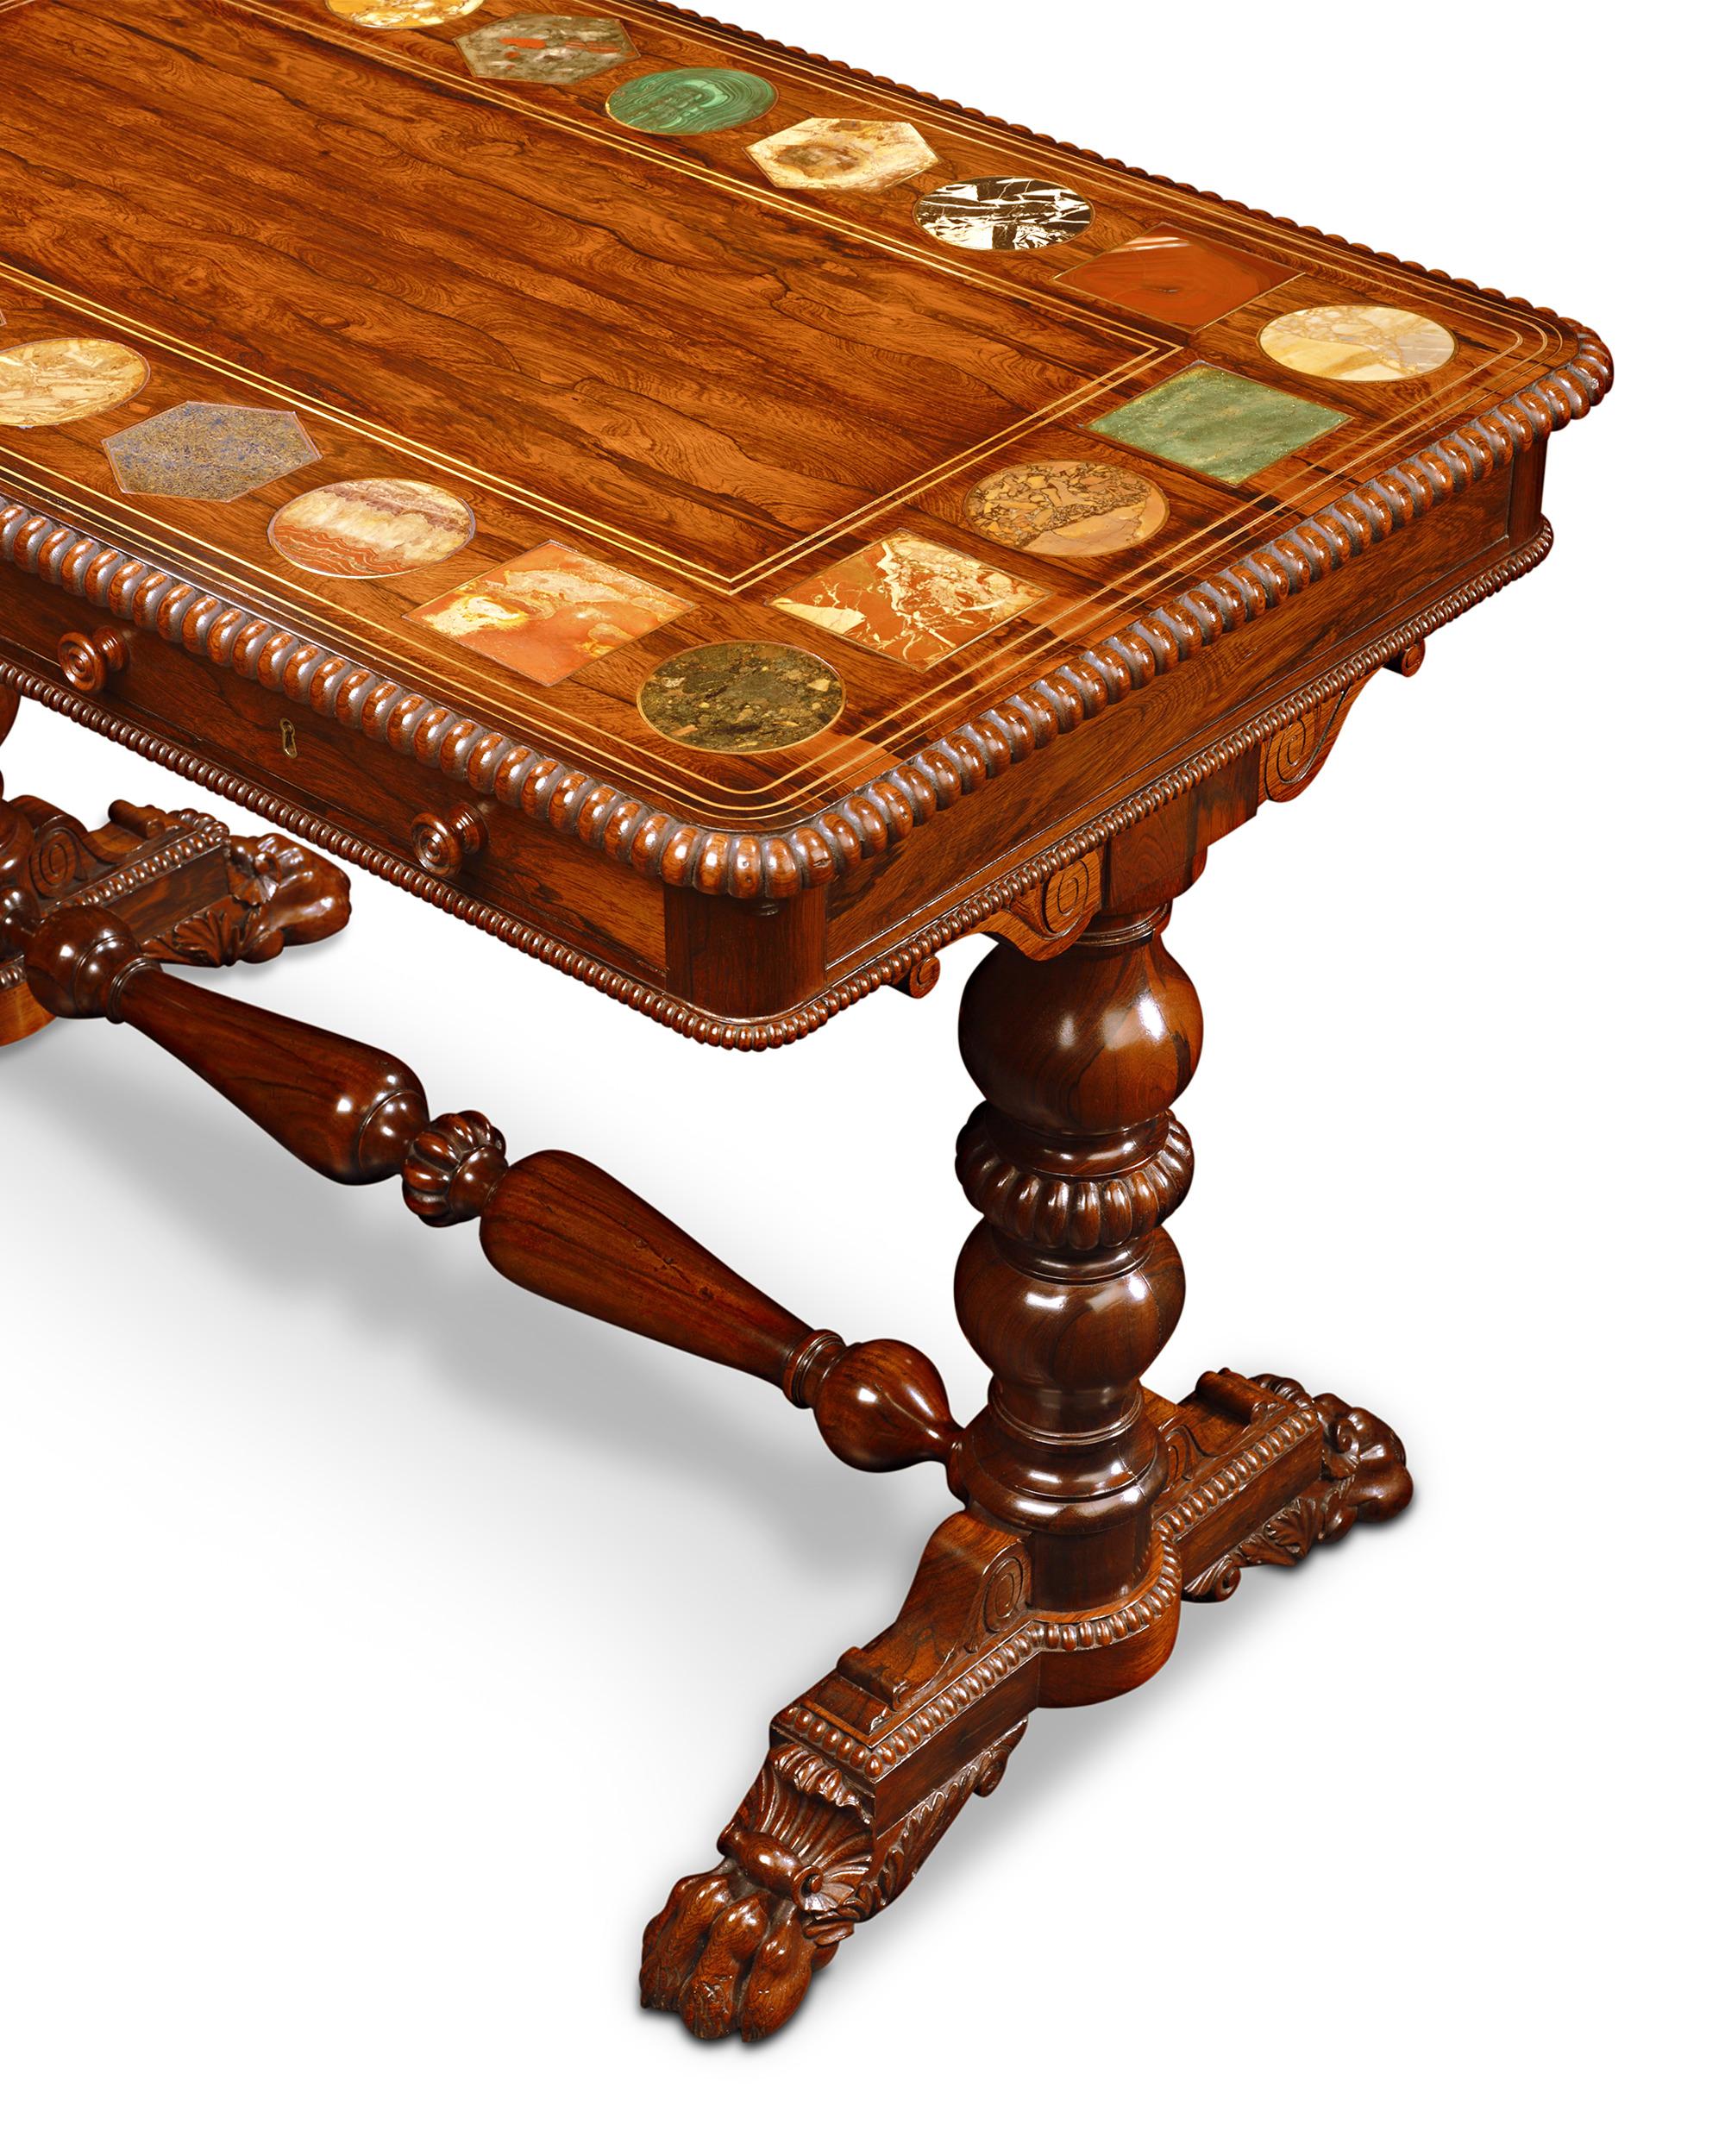 Regency Hardstone and Rosewood Centre Table Attributed to Gillows For Sale